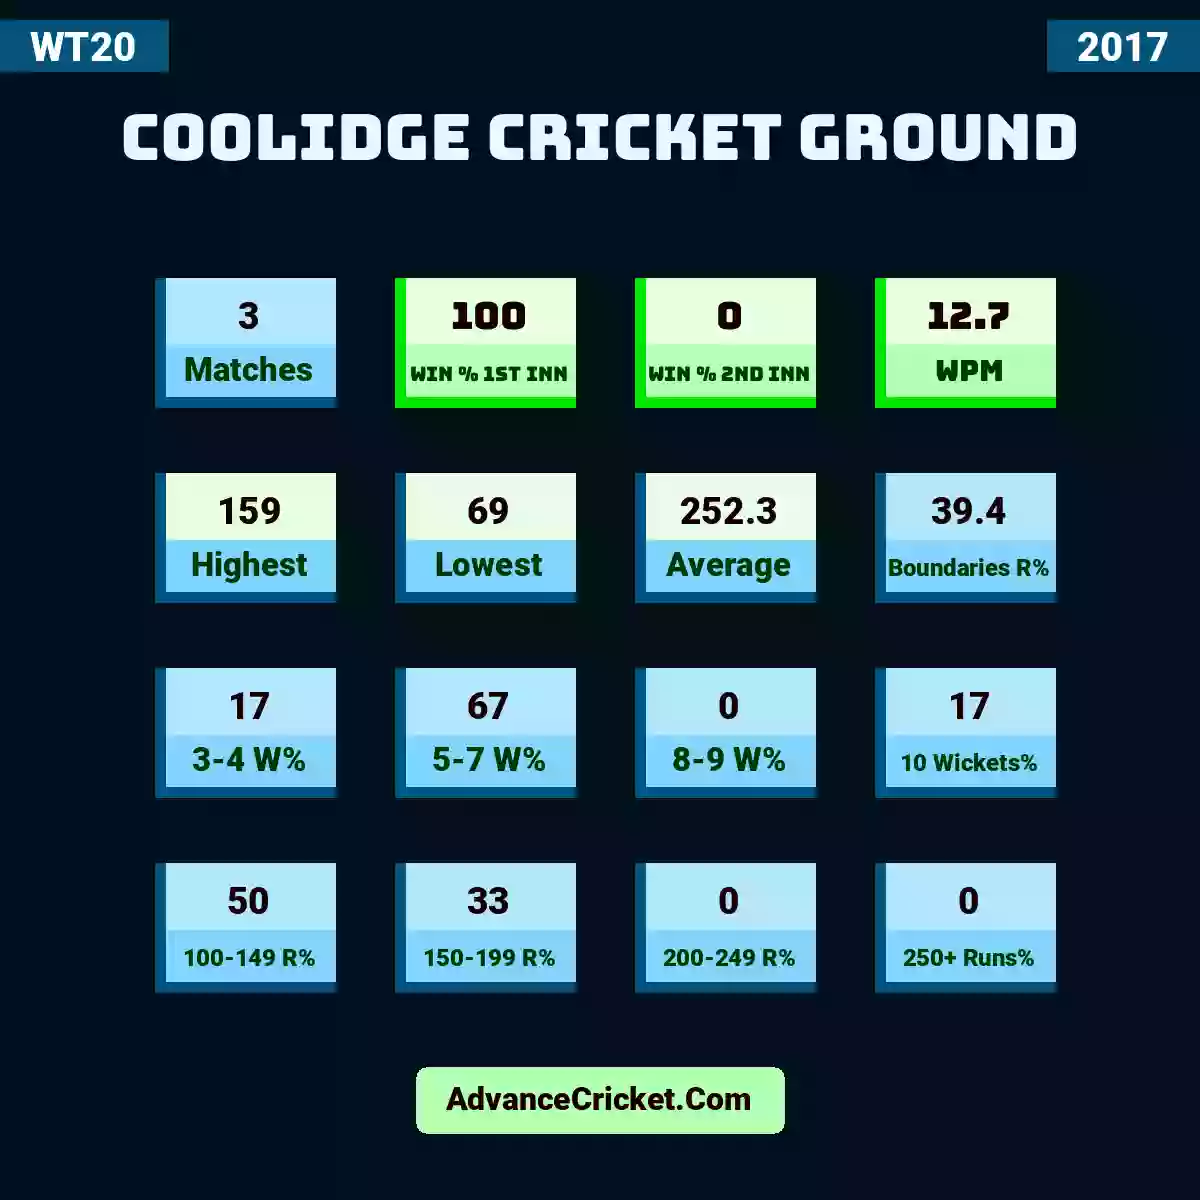 Image showing Coolidge Cricket Ground with Matches: 3, Win % 1st Inn: 100, Win % 2nd Inn: 0, WPM: 12.7, Highest: 159, Lowest: 69, Average: 252.3, Boundaries R%: 39.4, 3-4 W%: 17, 5-7 W%: 67, 8-9 W%: 0, 10 Wickets%: 17, 100-149 R%: 50, 150-199 R%: 33, 200-249 R%: 0, 250+ Runs%: 0.